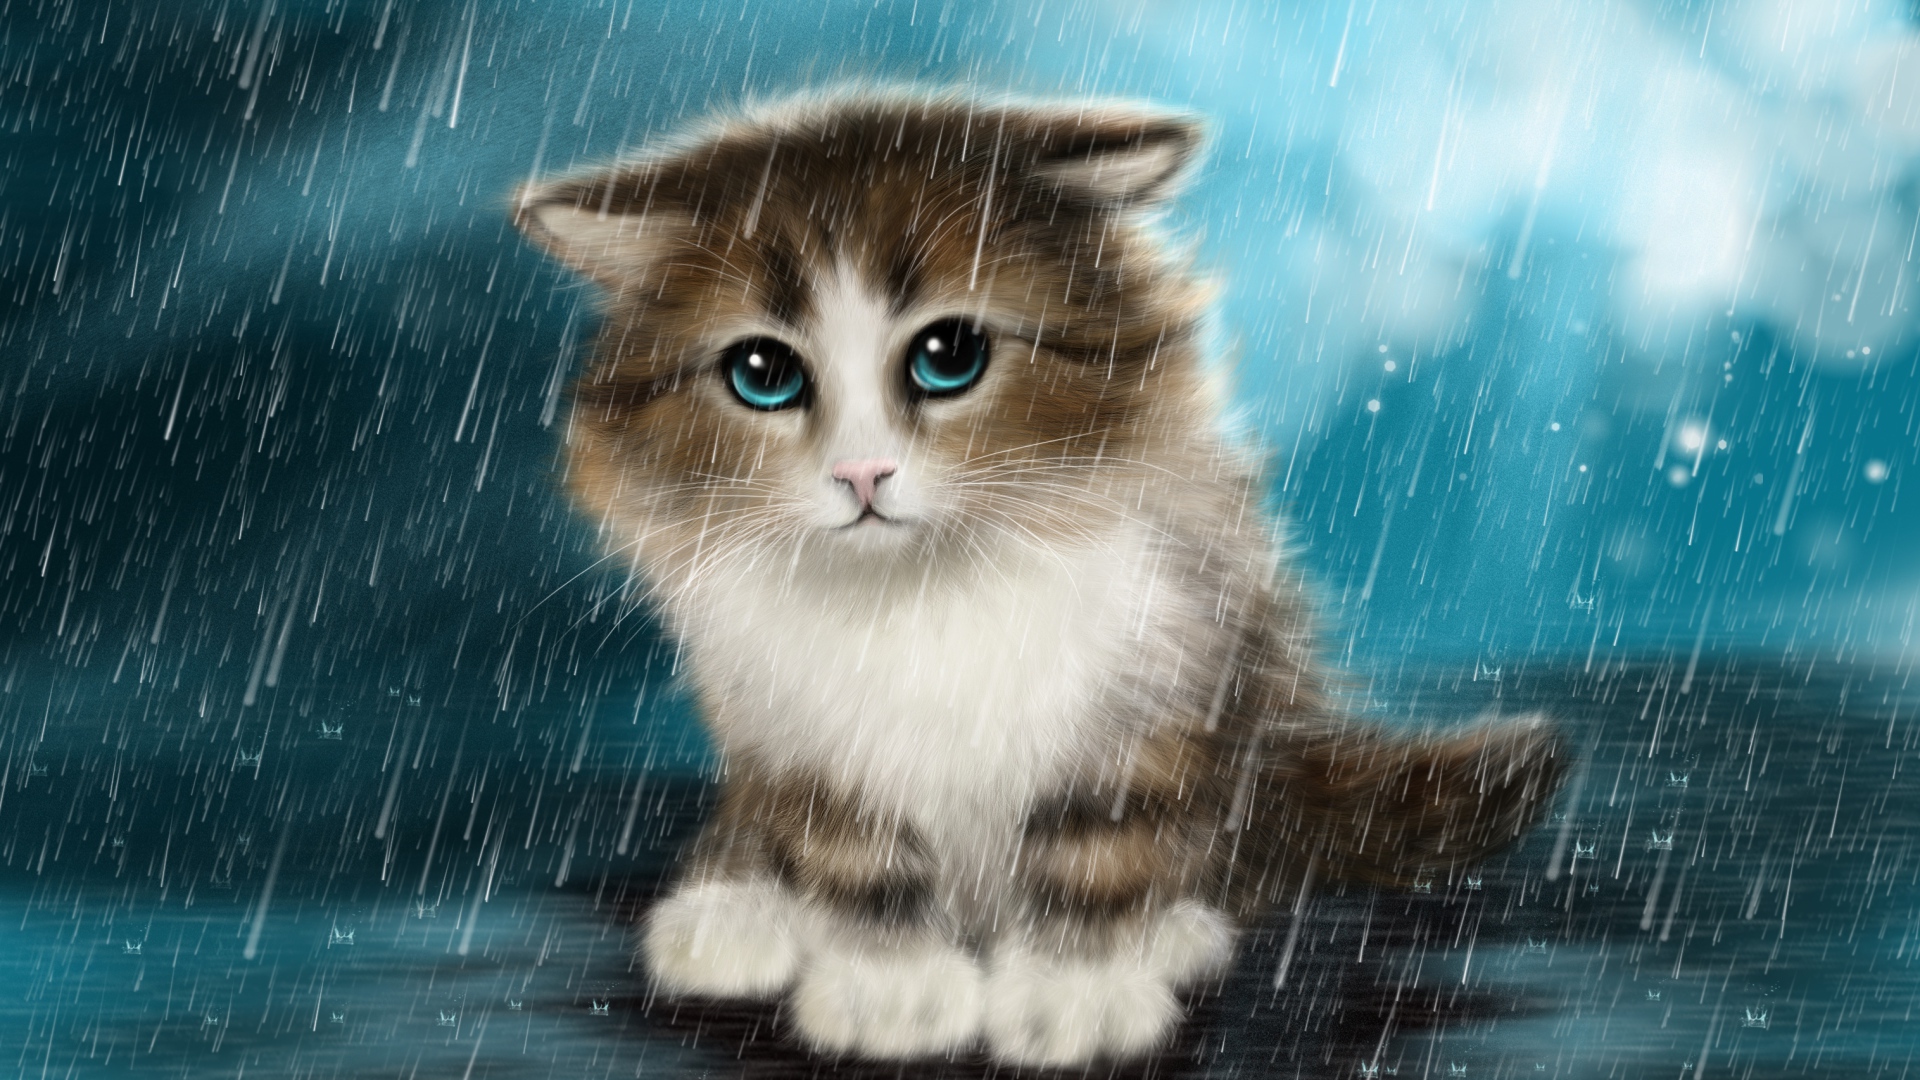 A small sad painted kitten in the rain